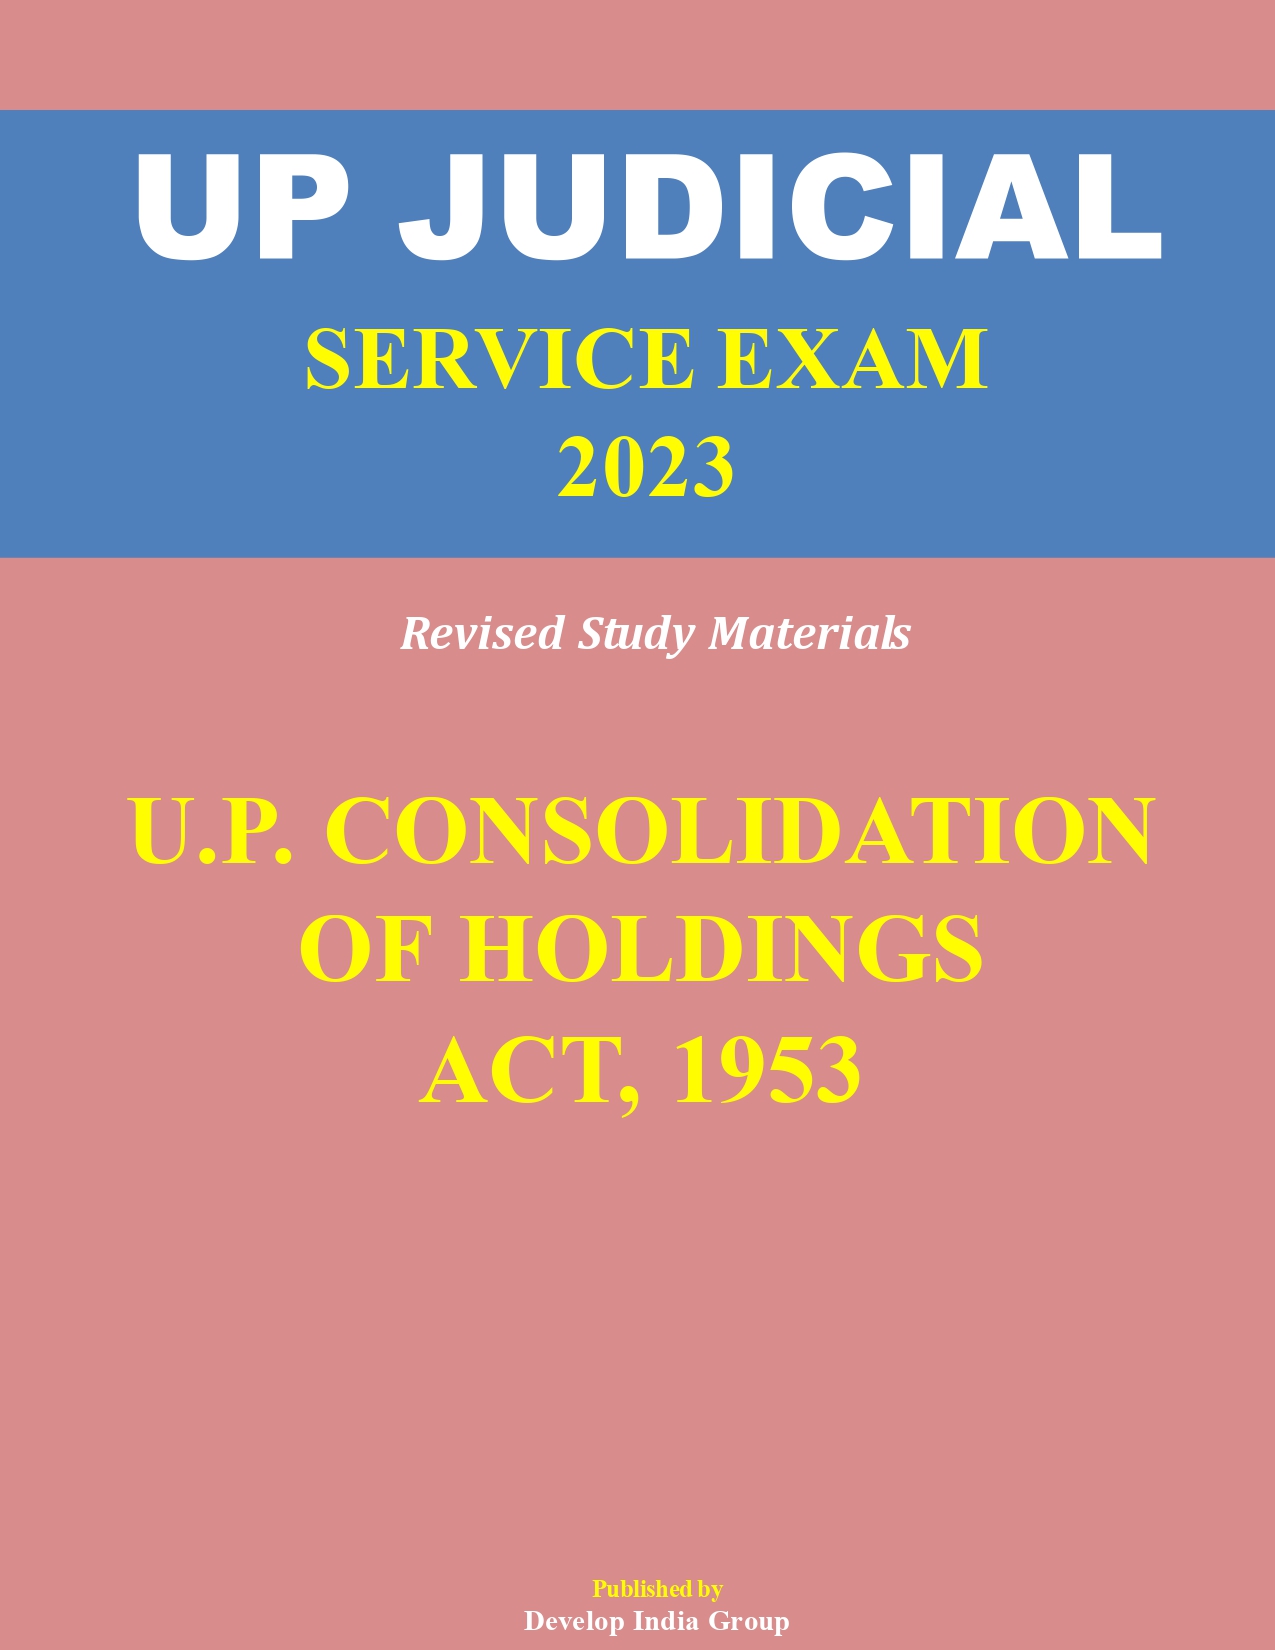 U.P. Consolidation of Holdings Act